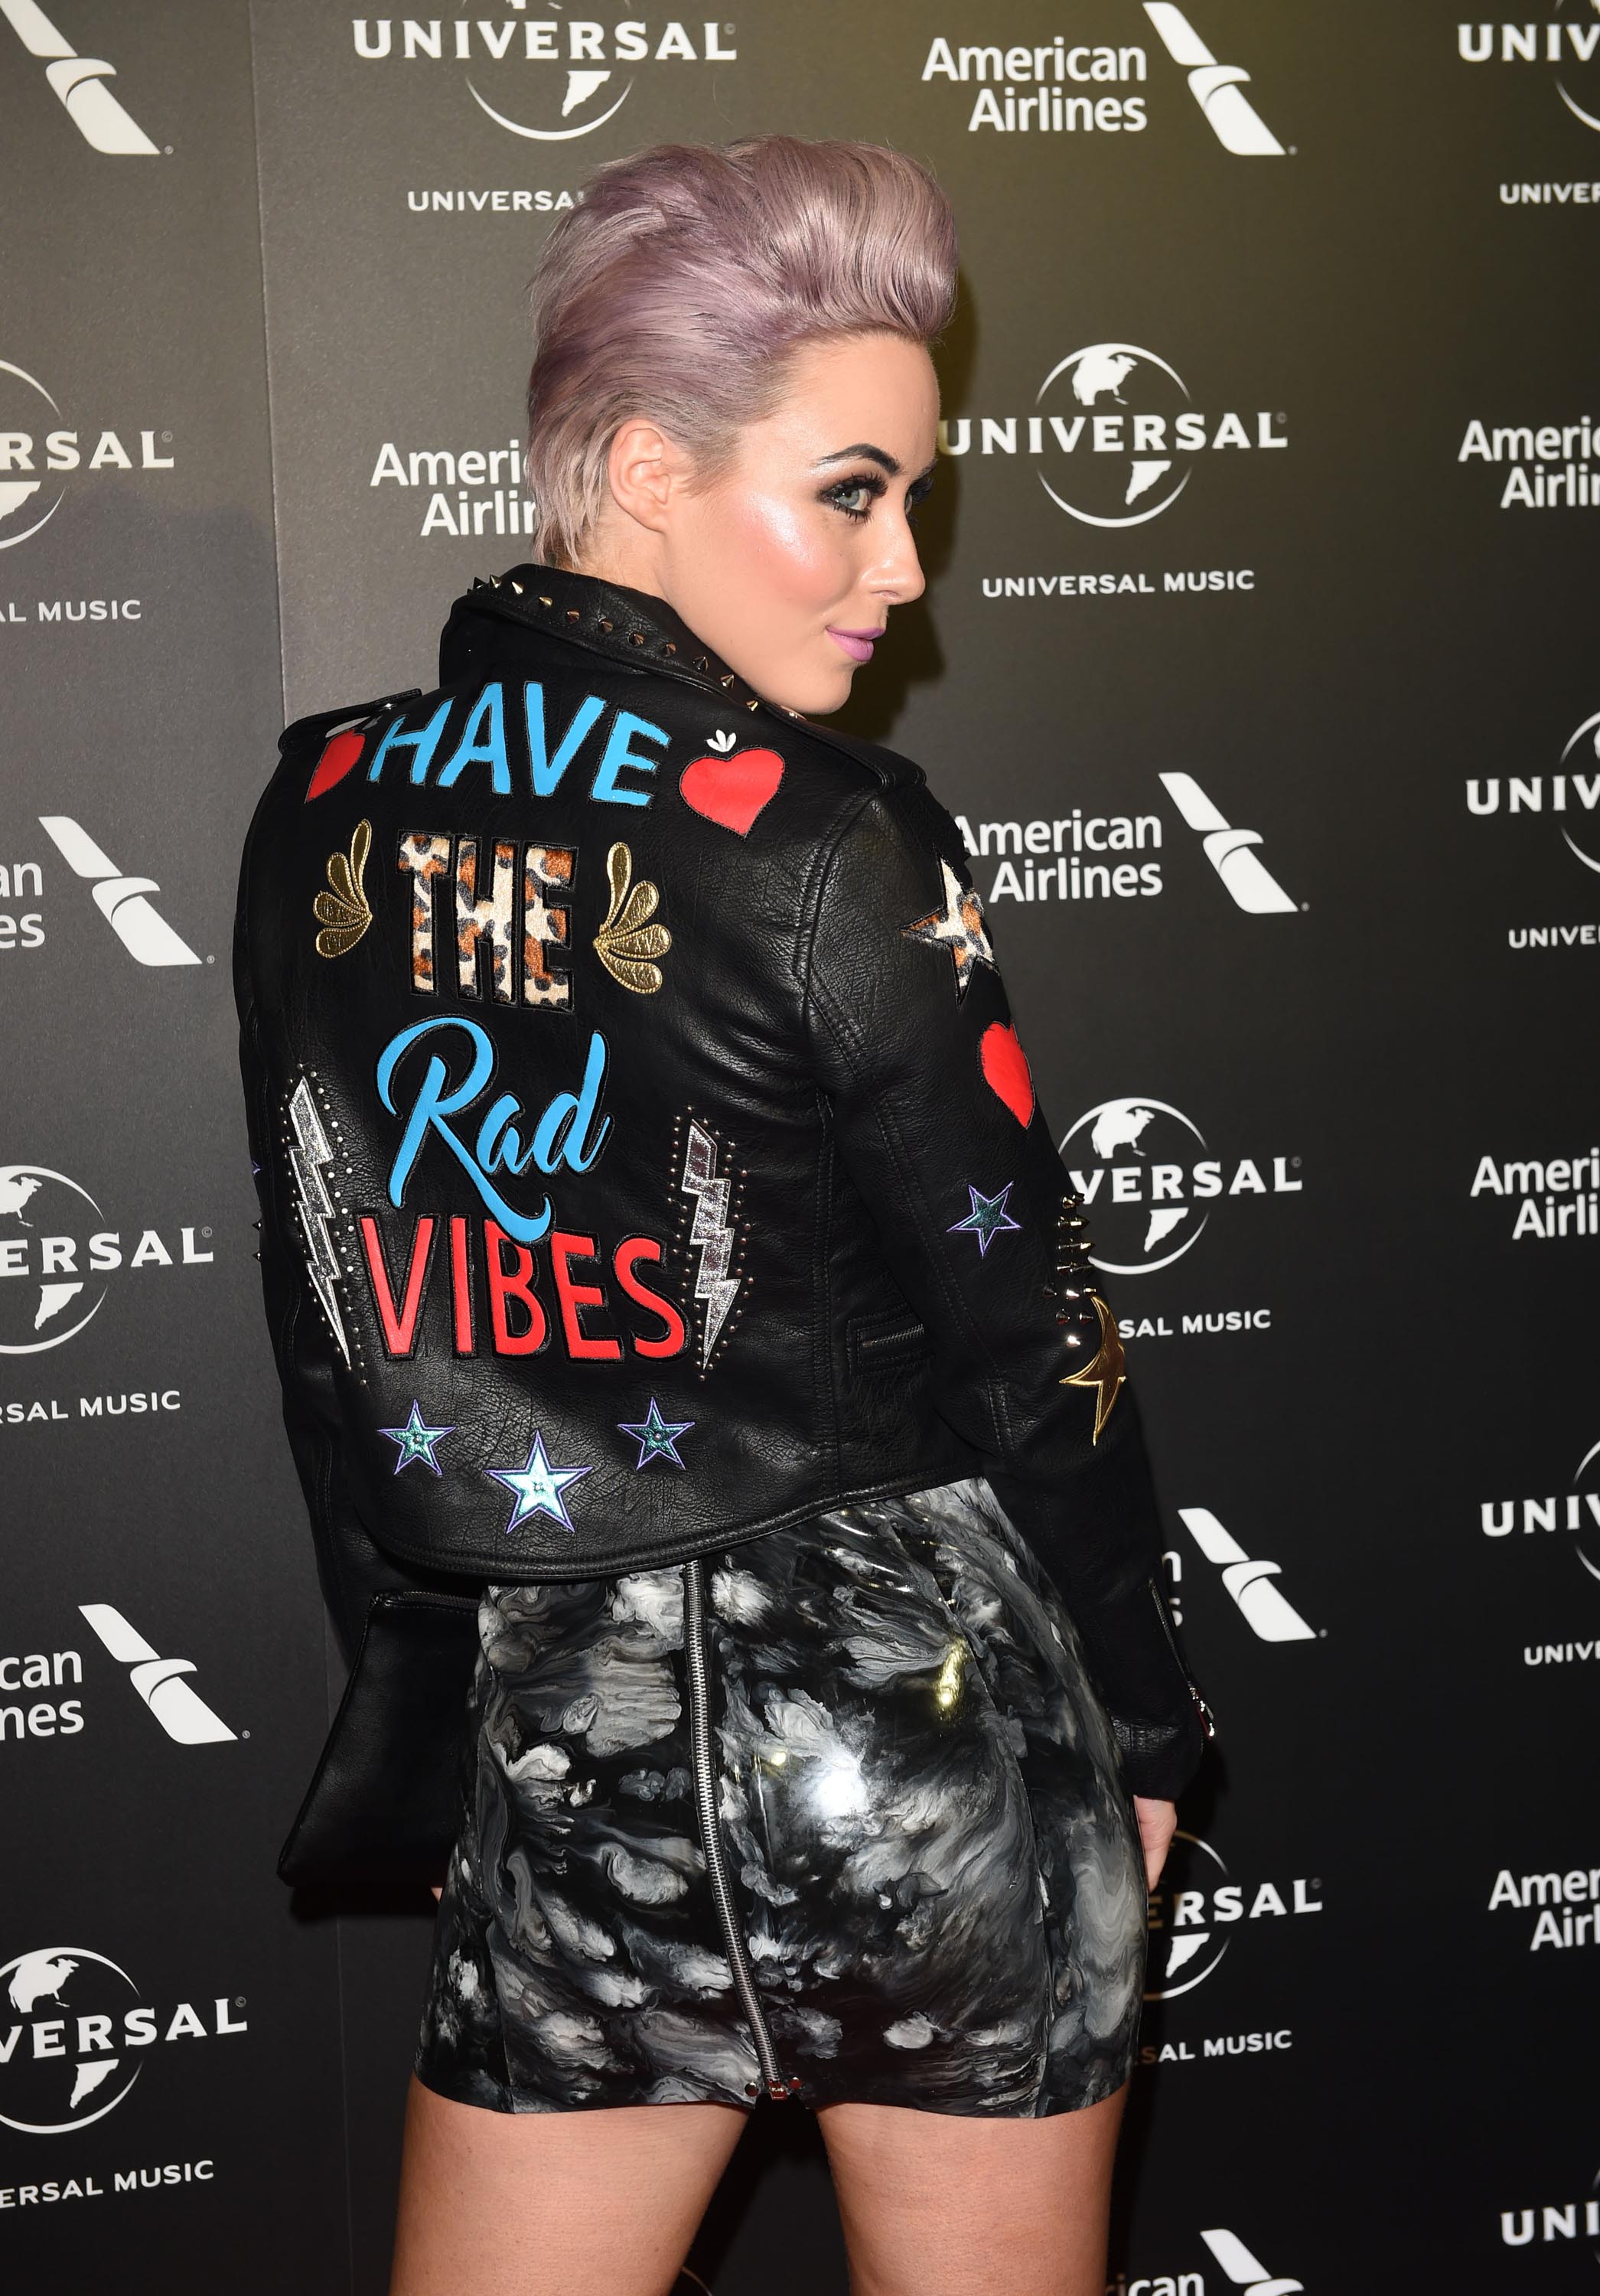 Hatty Keane attends the Universal Music pre-BRIT Award party